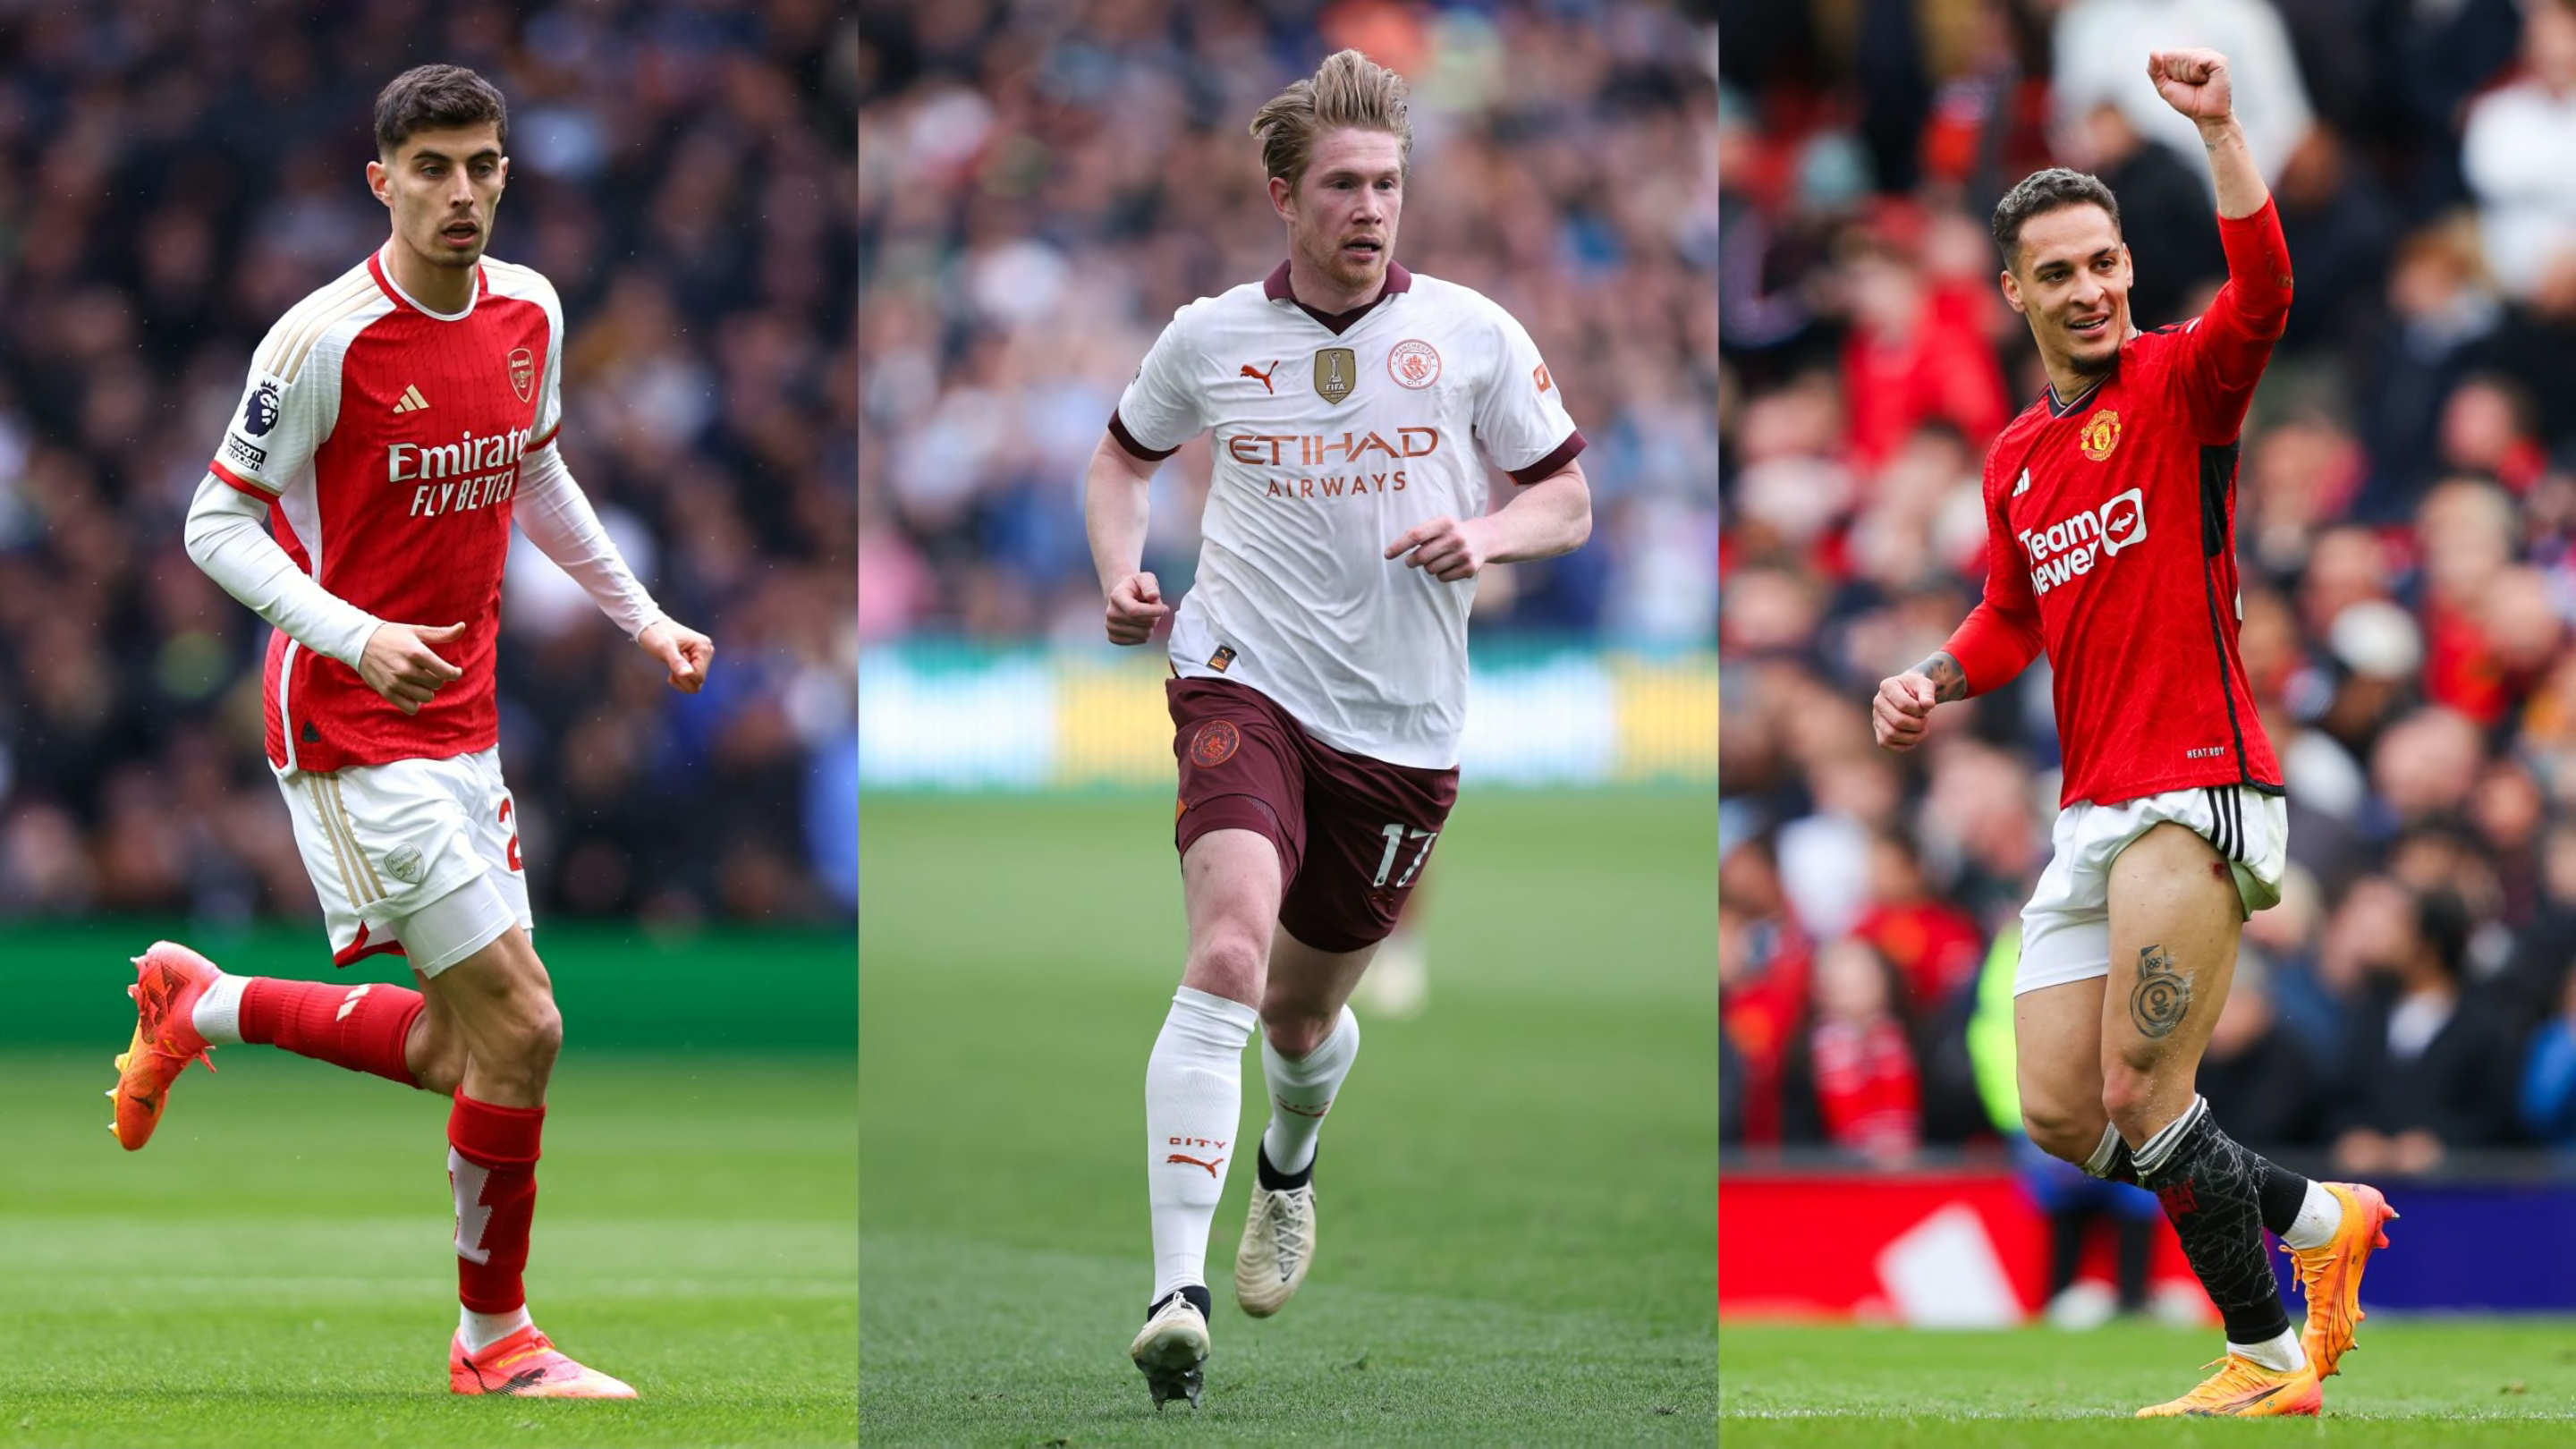 The 8 best players of Premier League Gameweek 35 - ranked